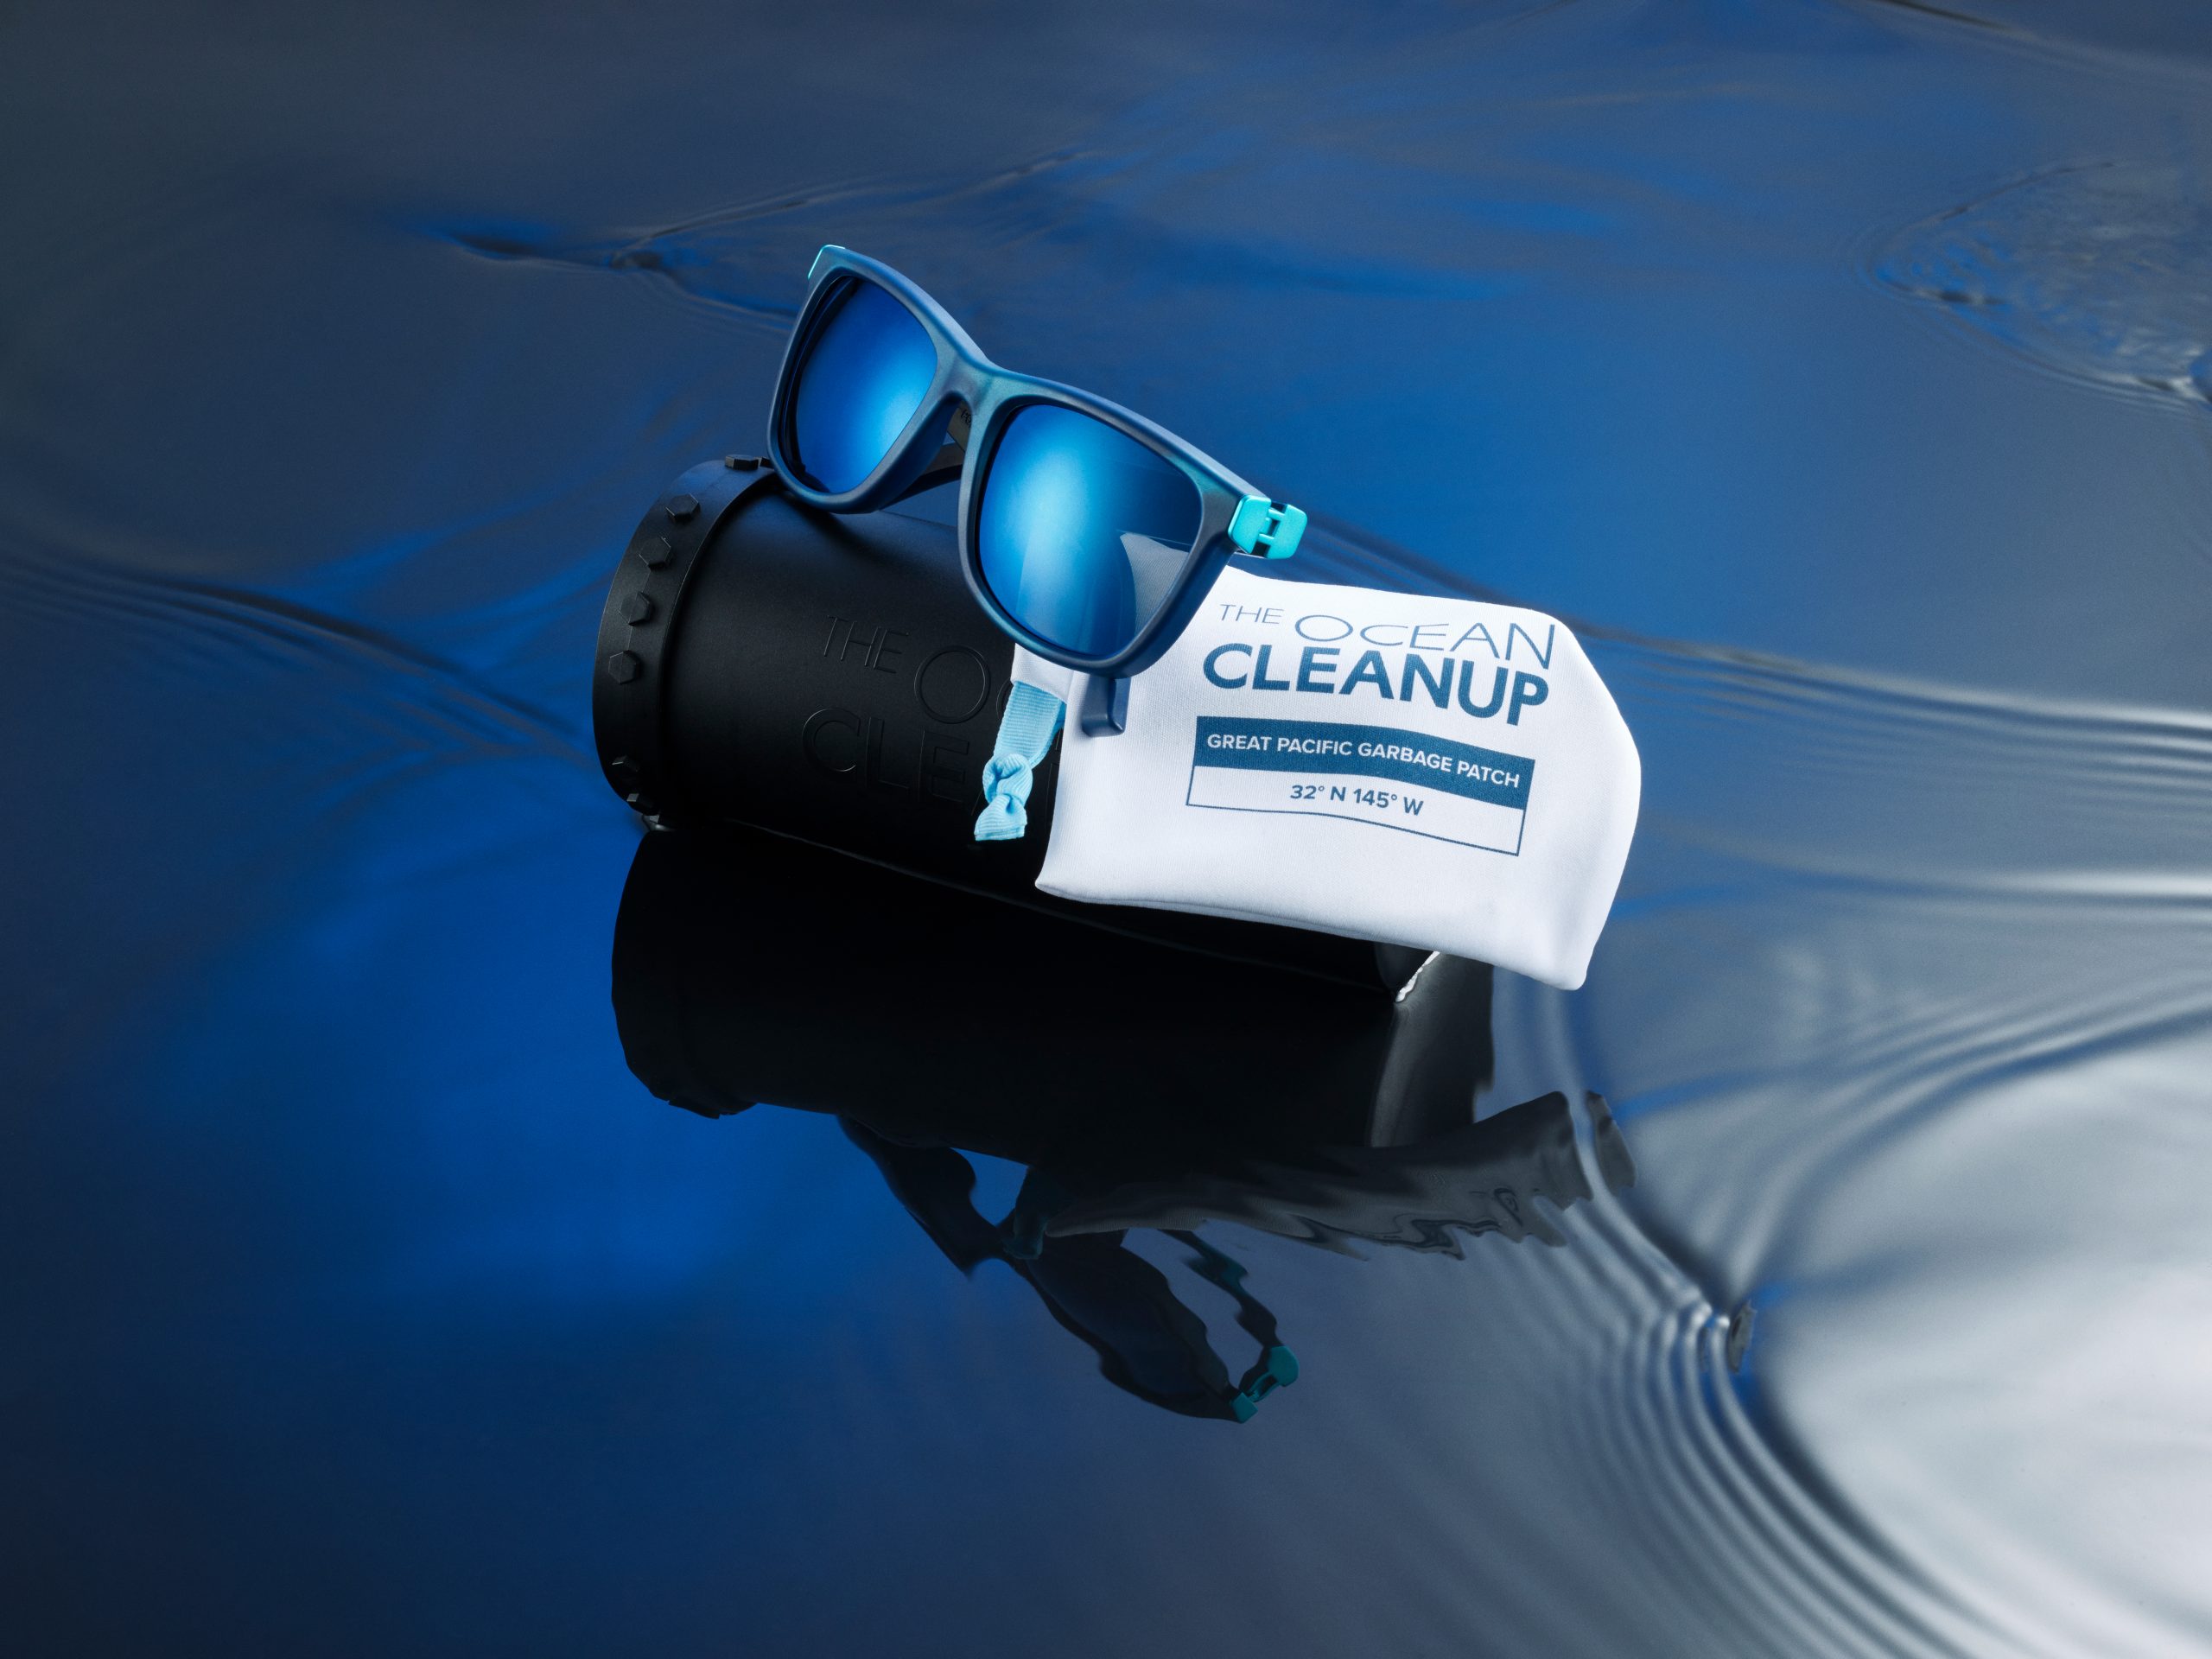 The glasses are made with the first plastic catch during the System 001/B campaign in the GPGP. When the campaign concluded, the plastic was returned to shore in December 2019, marking the end of Mission One and starting the next journey: going full circle from trash to treasure by creating a product to help fund further cleanup.